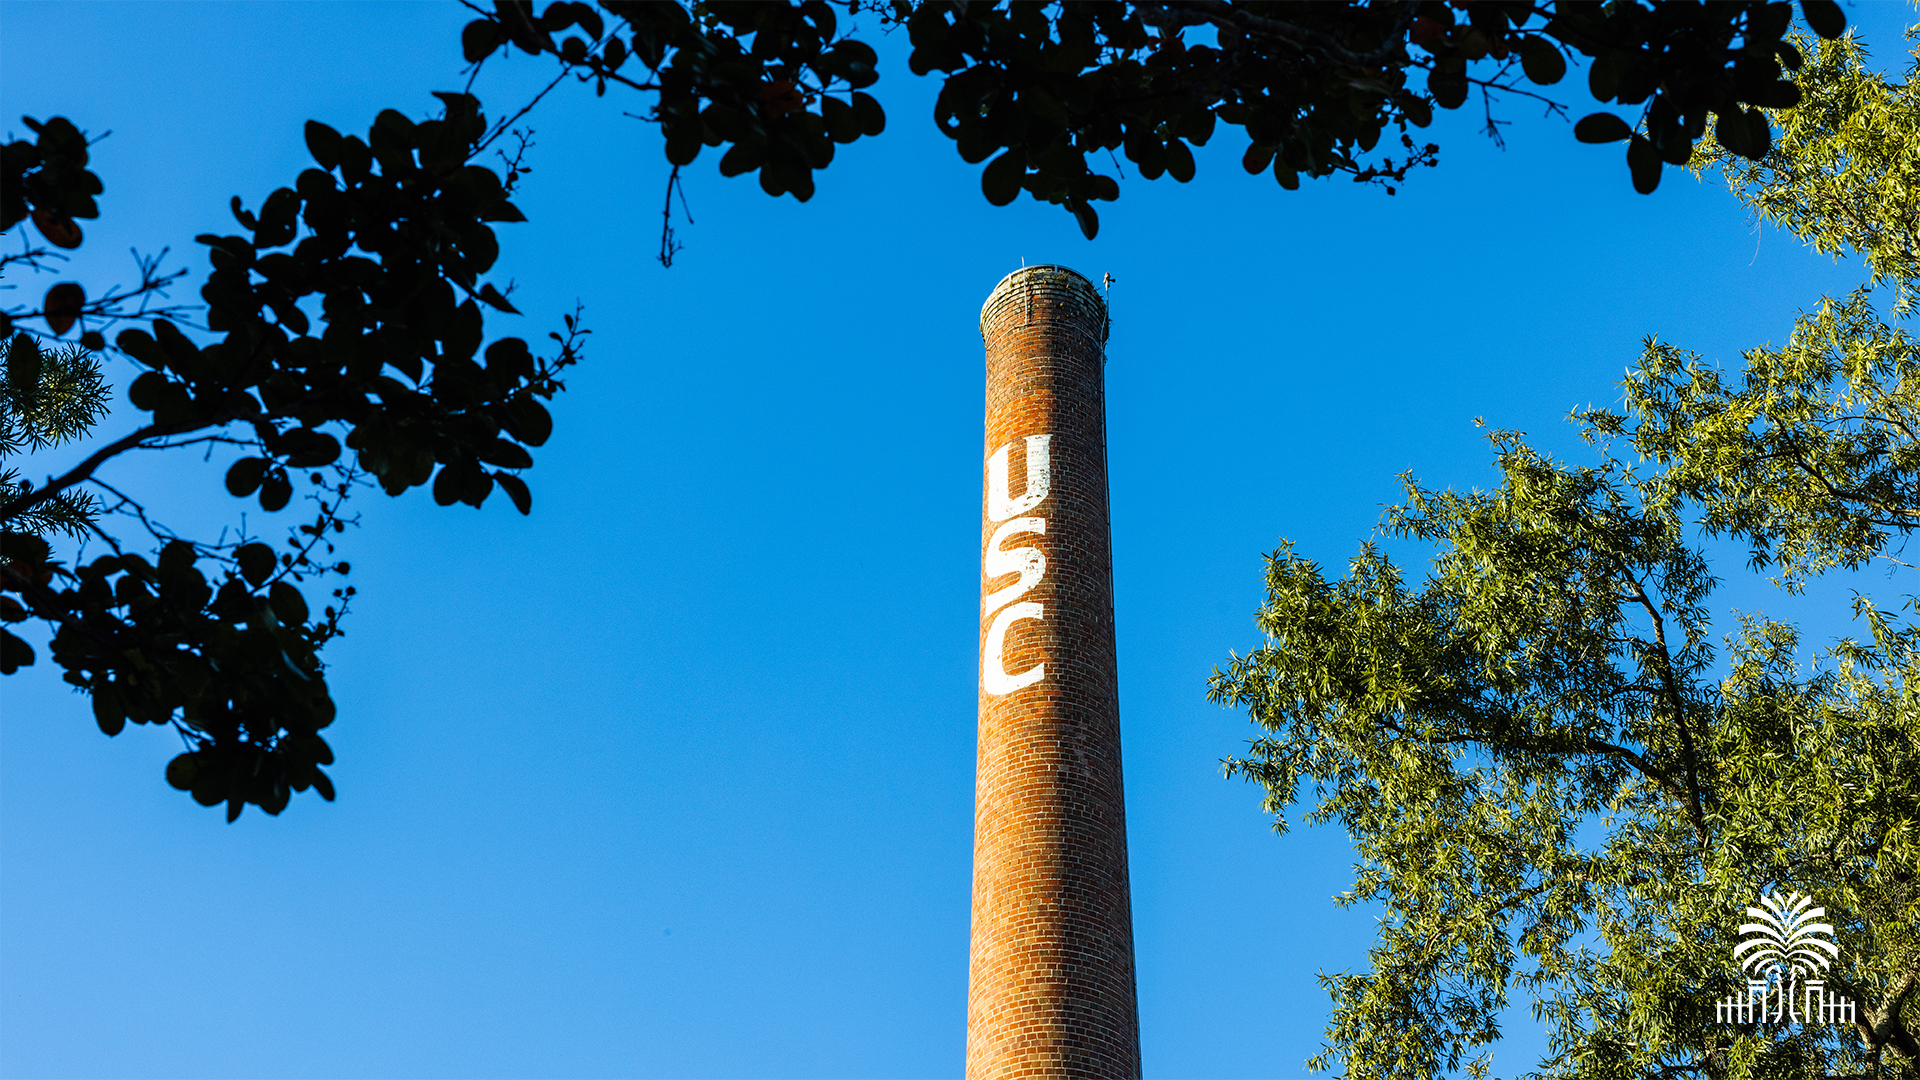 The USC smokestack with tree and gates mark